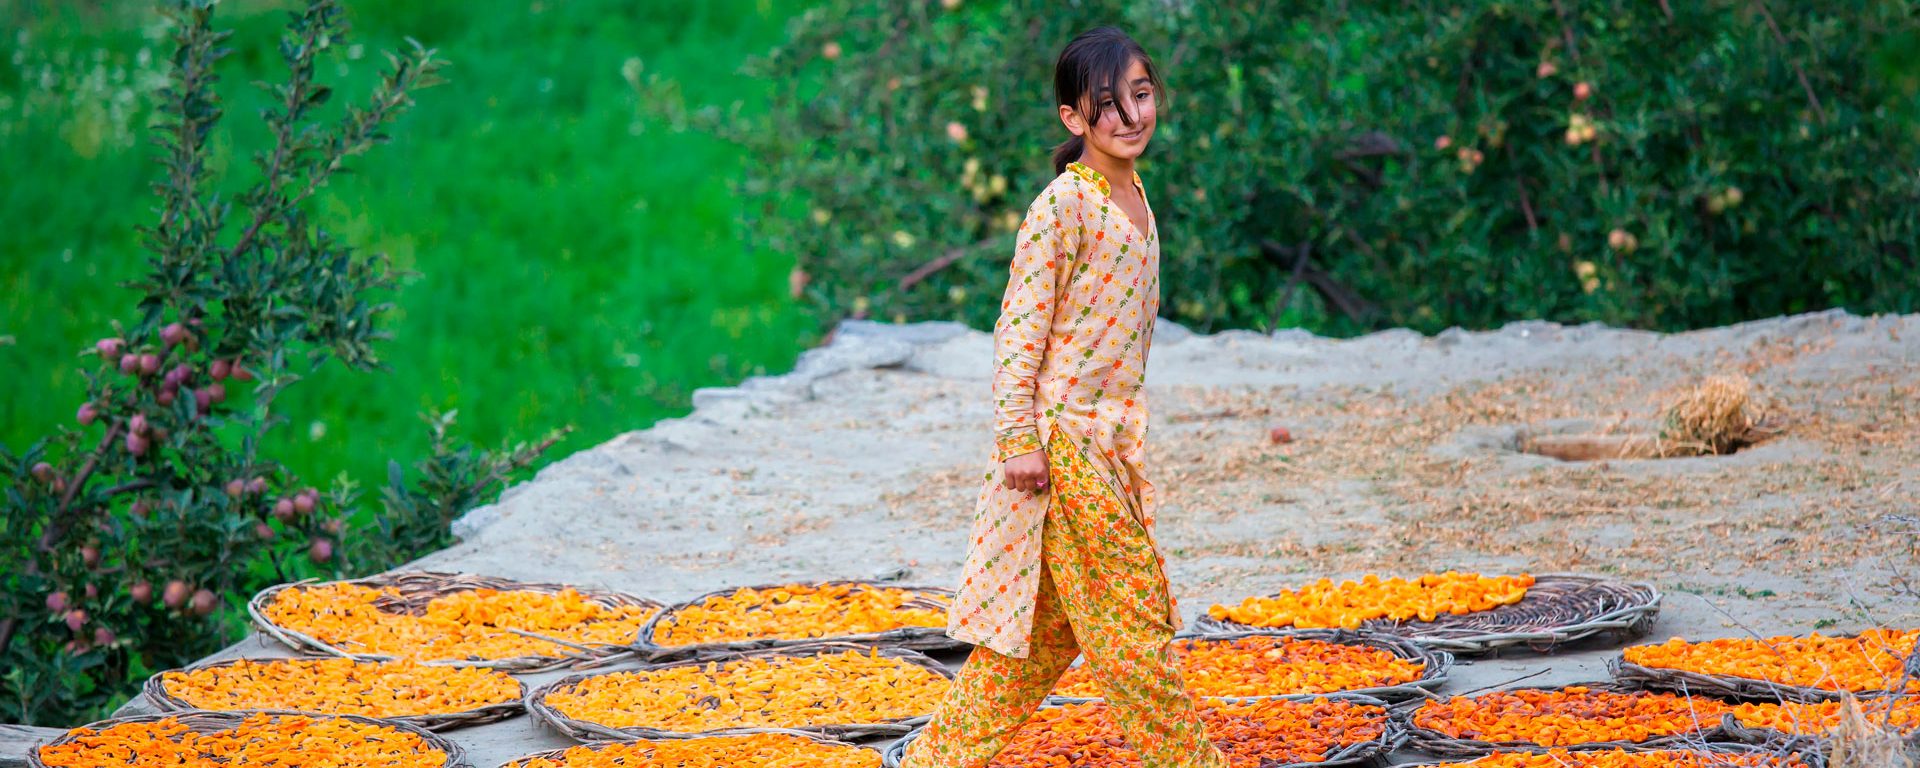 Smiling girl on rooftop, drying apricot fruit, Hunza, northern Pakistan